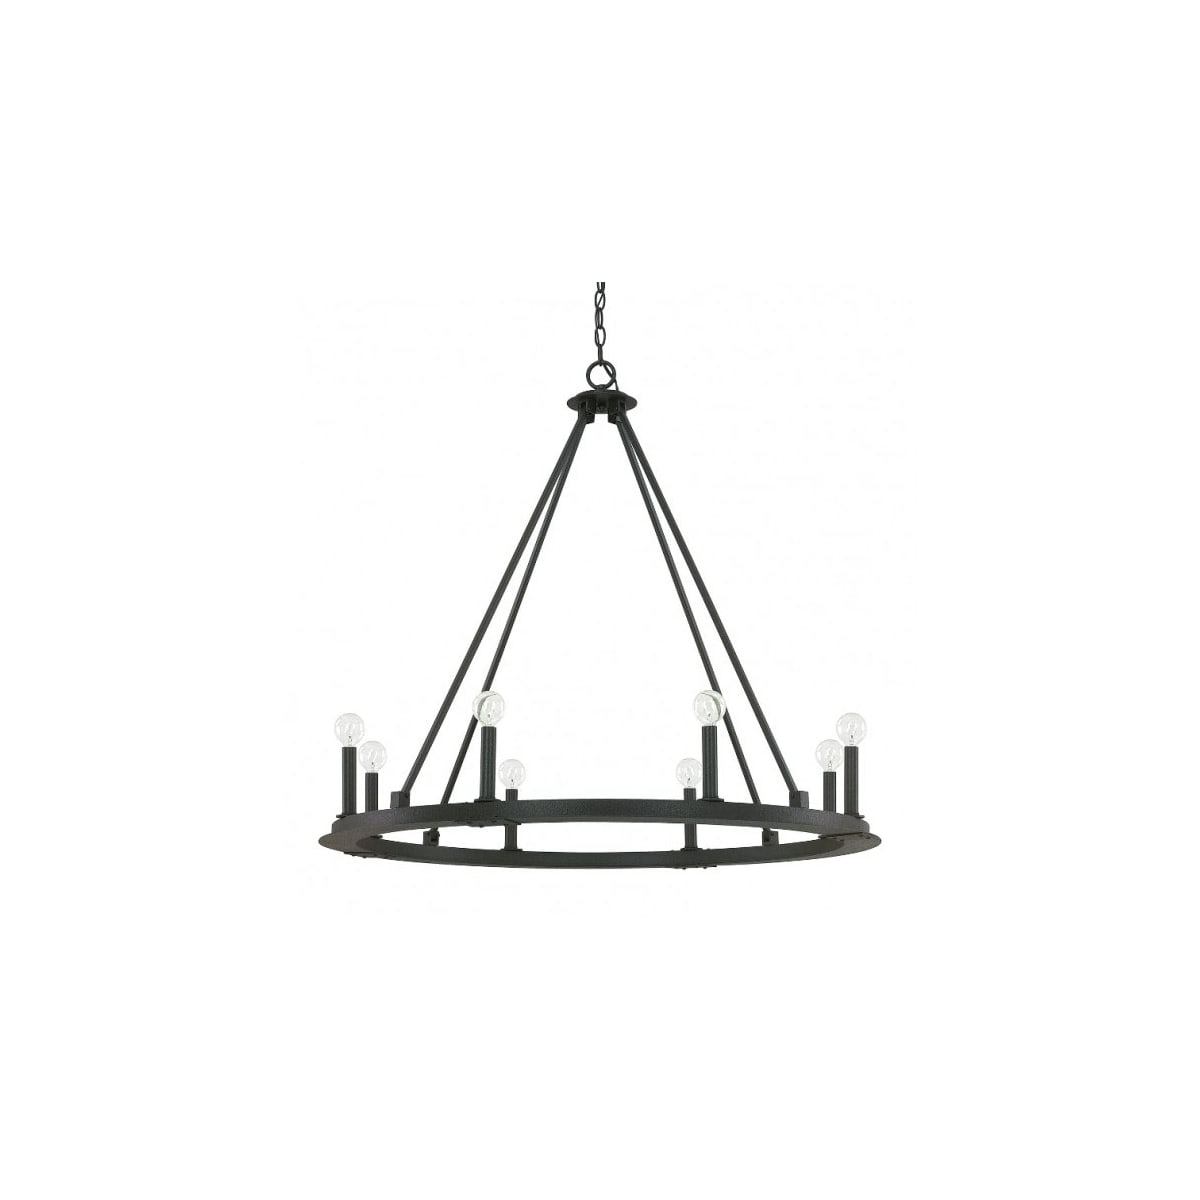 Shop Capital Lighting Pearson 8 Light 36" Wide Chandelier from Build.com on Openhaus